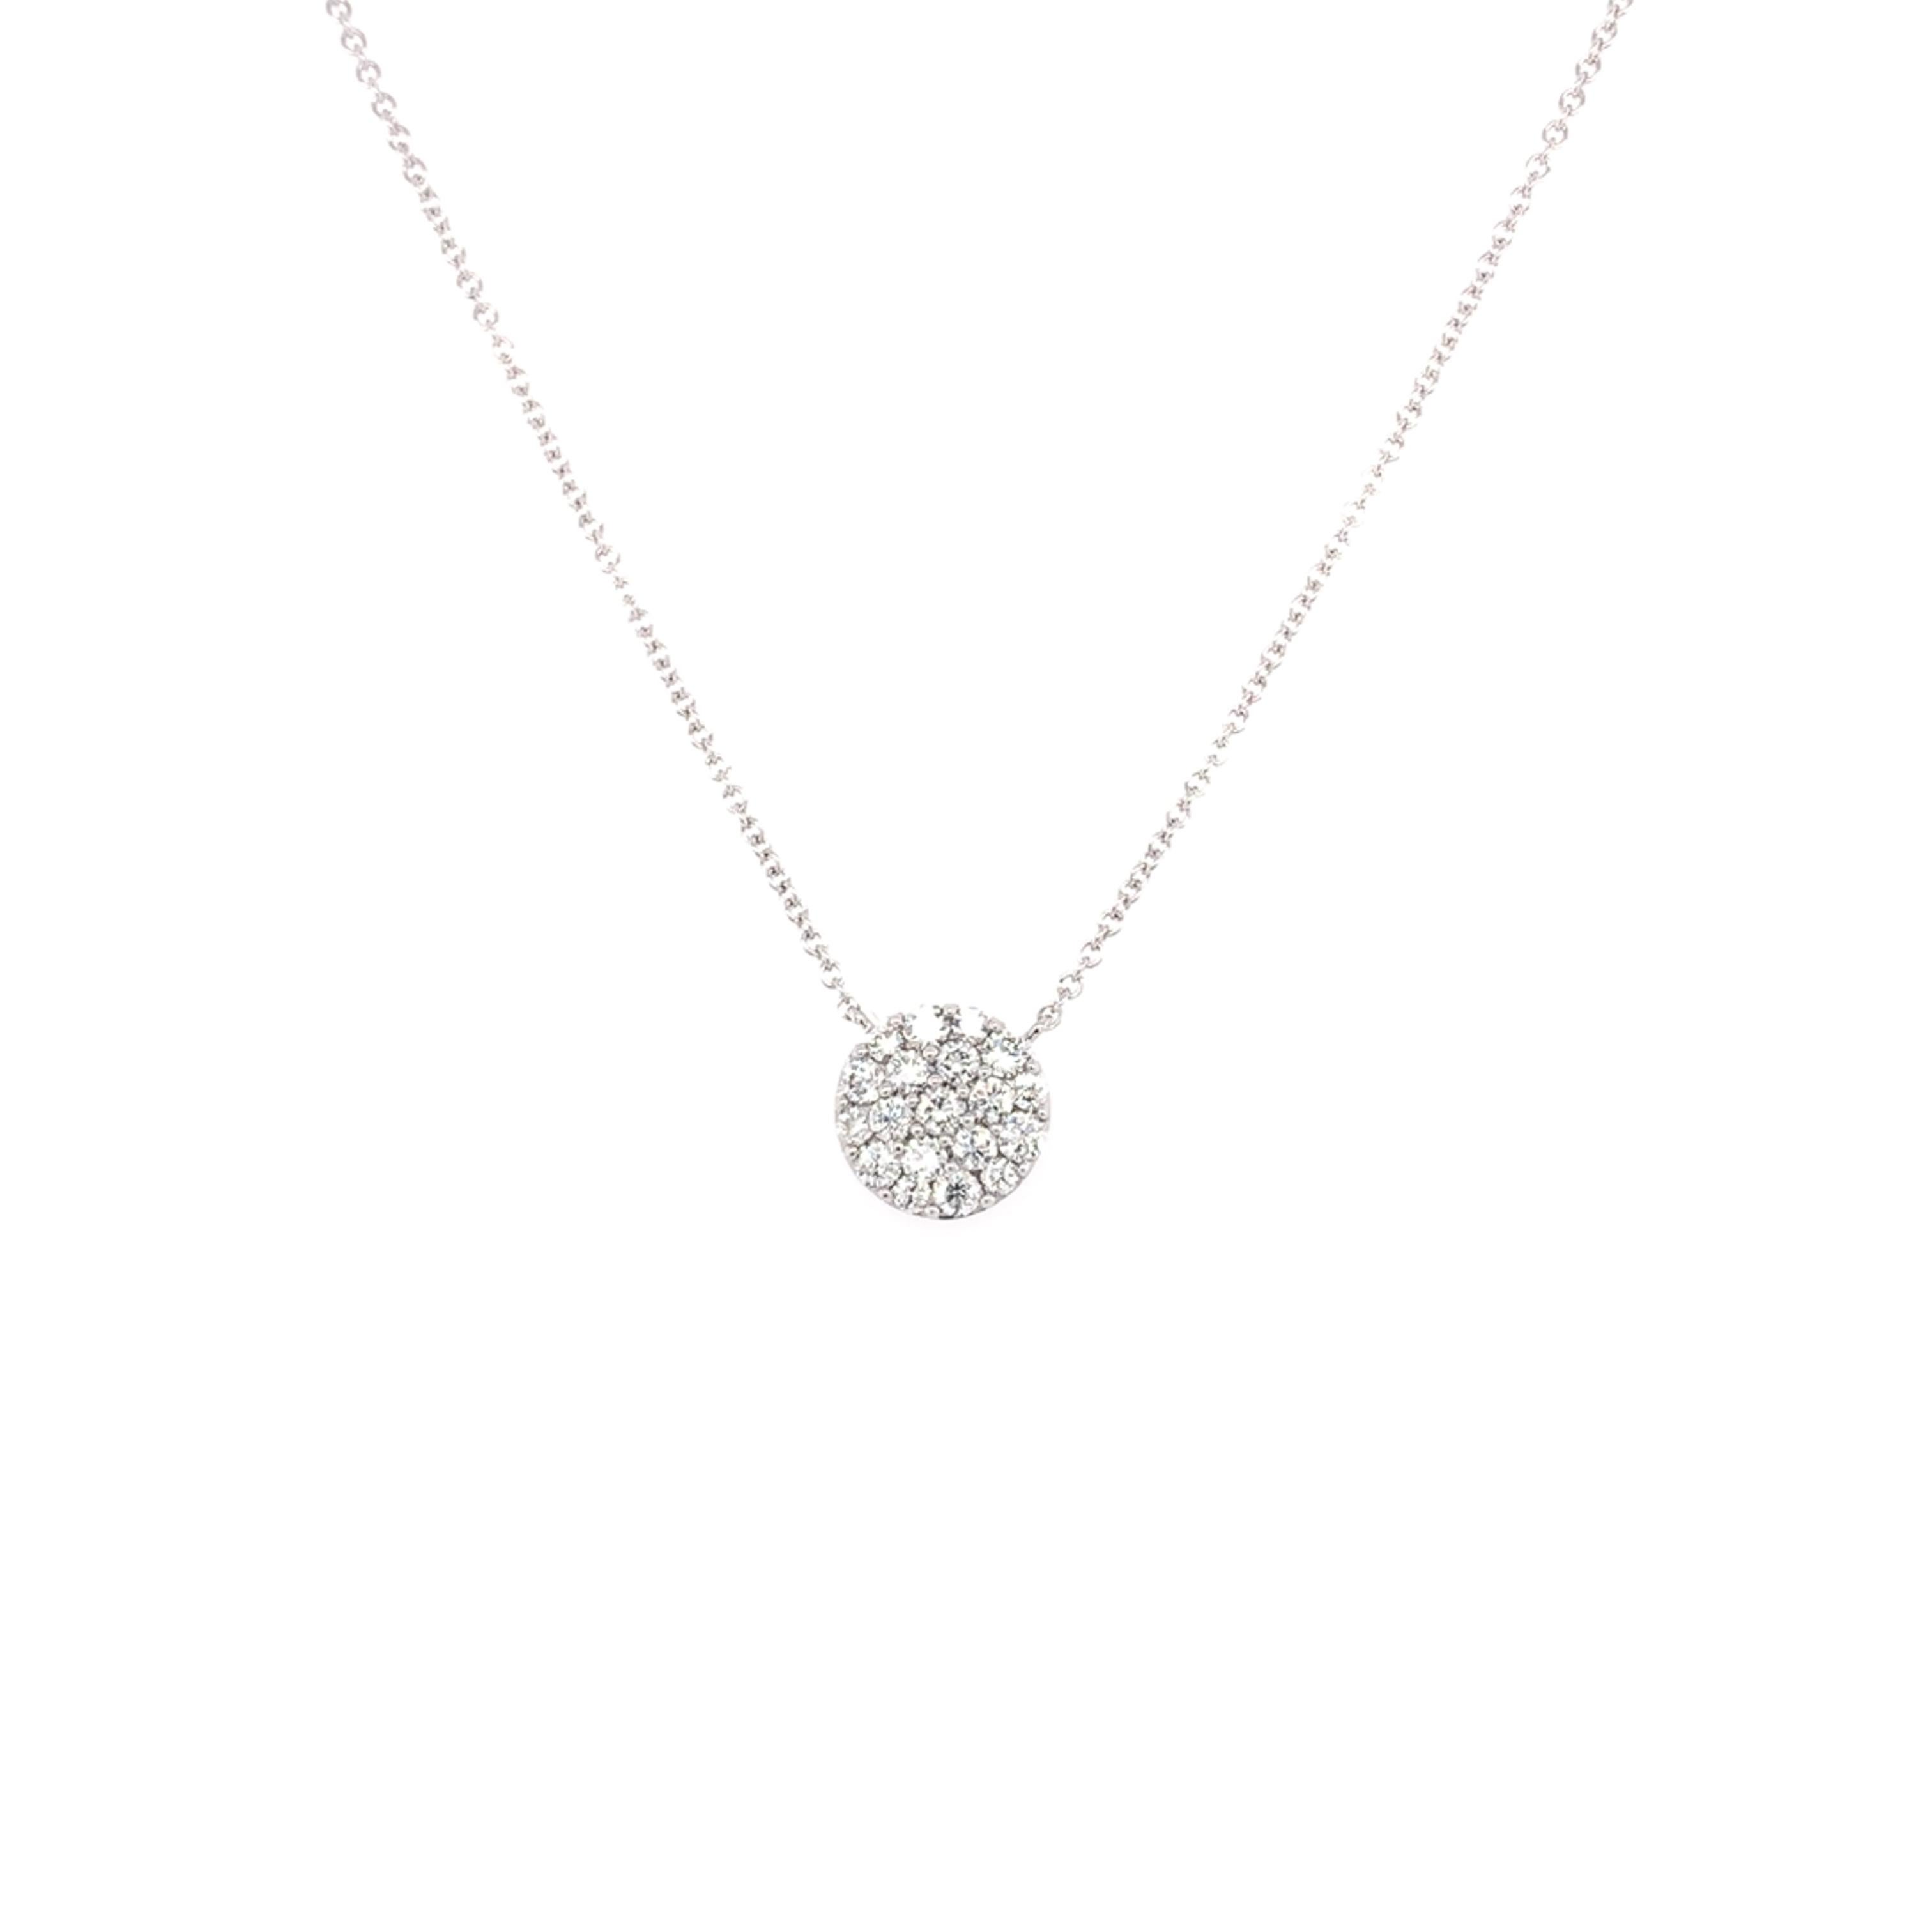 Diamond cluster pendant made with real/natural brilliant cut diamonds. Total Diamond Weight: 0.44cts. Diamond Quantity: 19 round diamonds. Color: G-H. Clarity: VS. Mounted on 18kt white gold setting 16 inch chain.